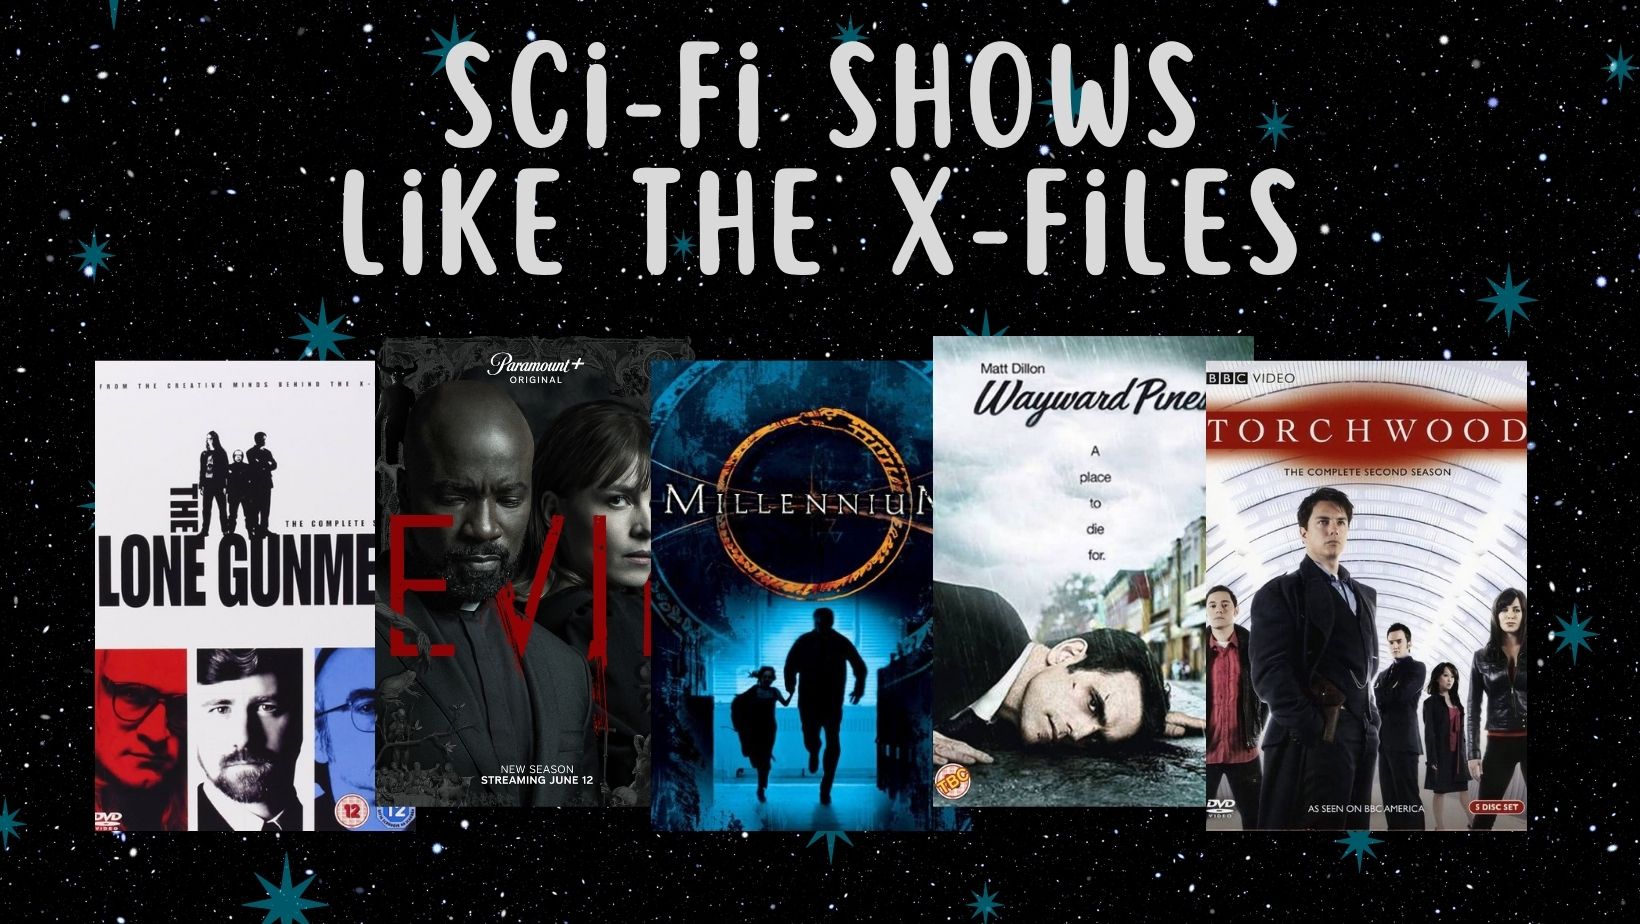 Like This Watch That: 20 Other Sci-Fi Shows Like The X-Files